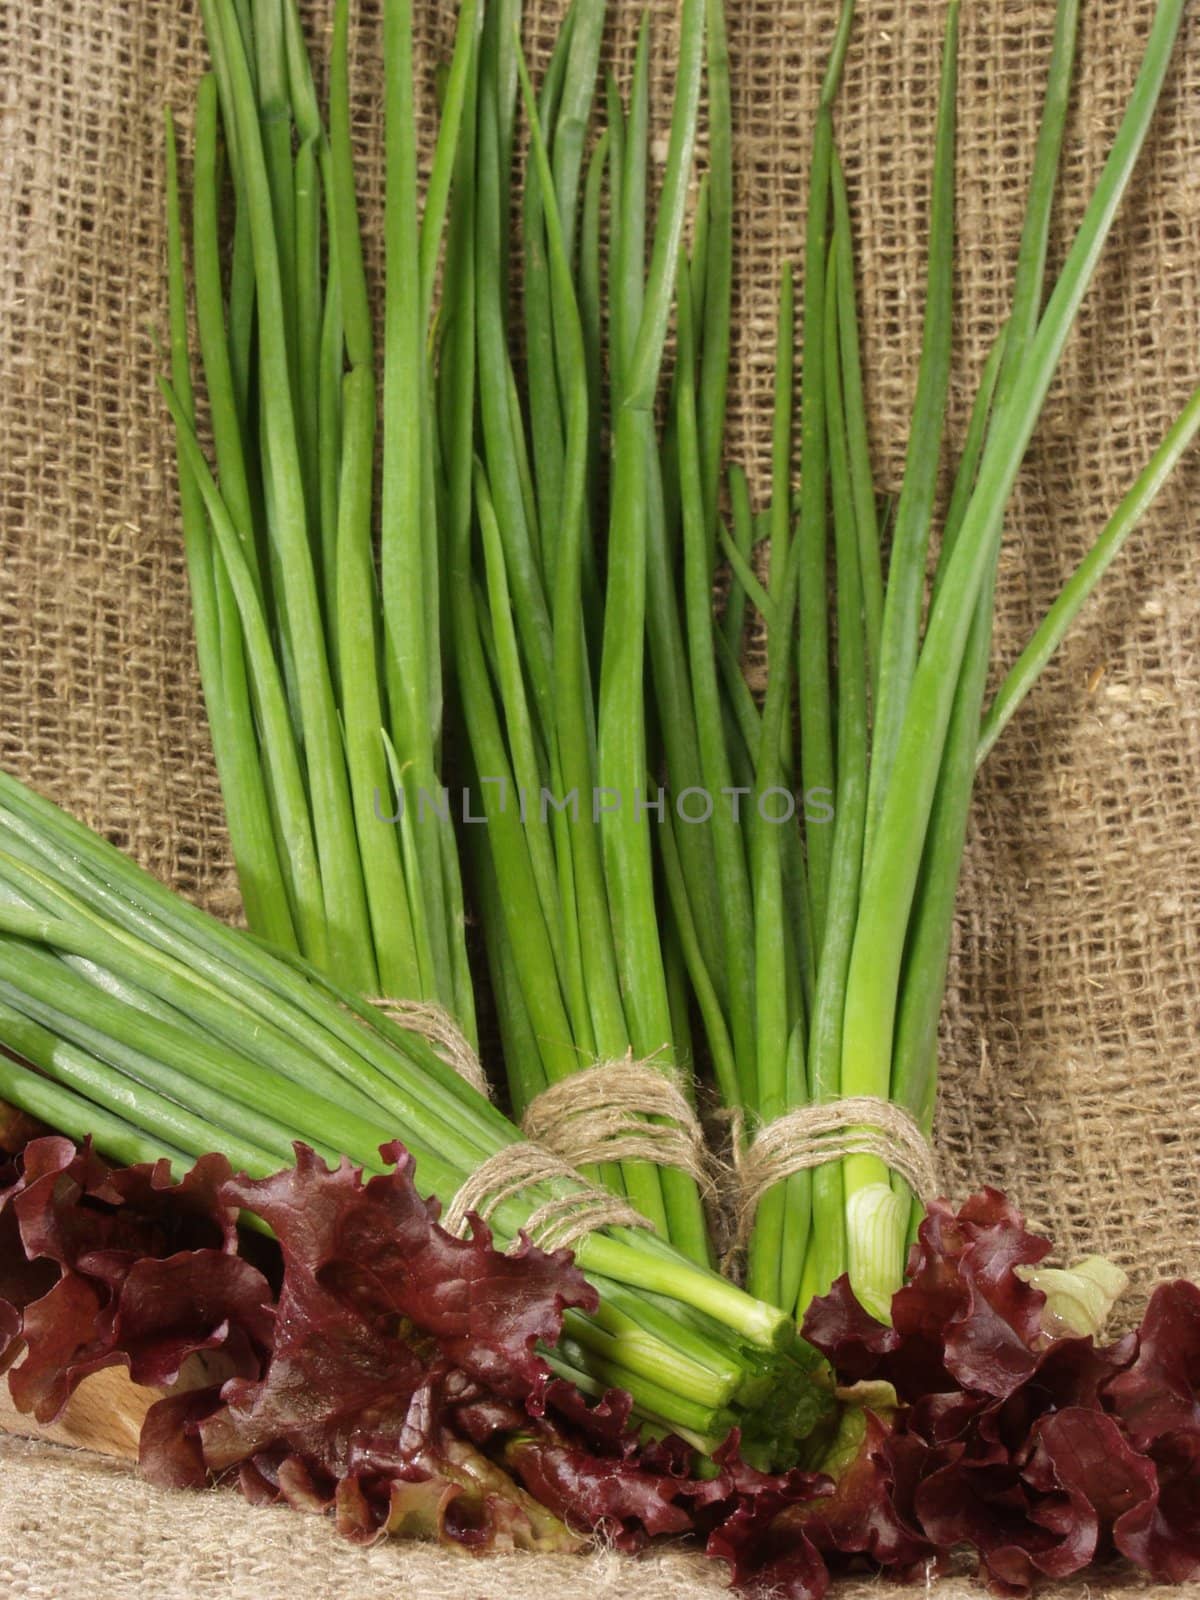 Bunches of the cut off green onions by dyoma